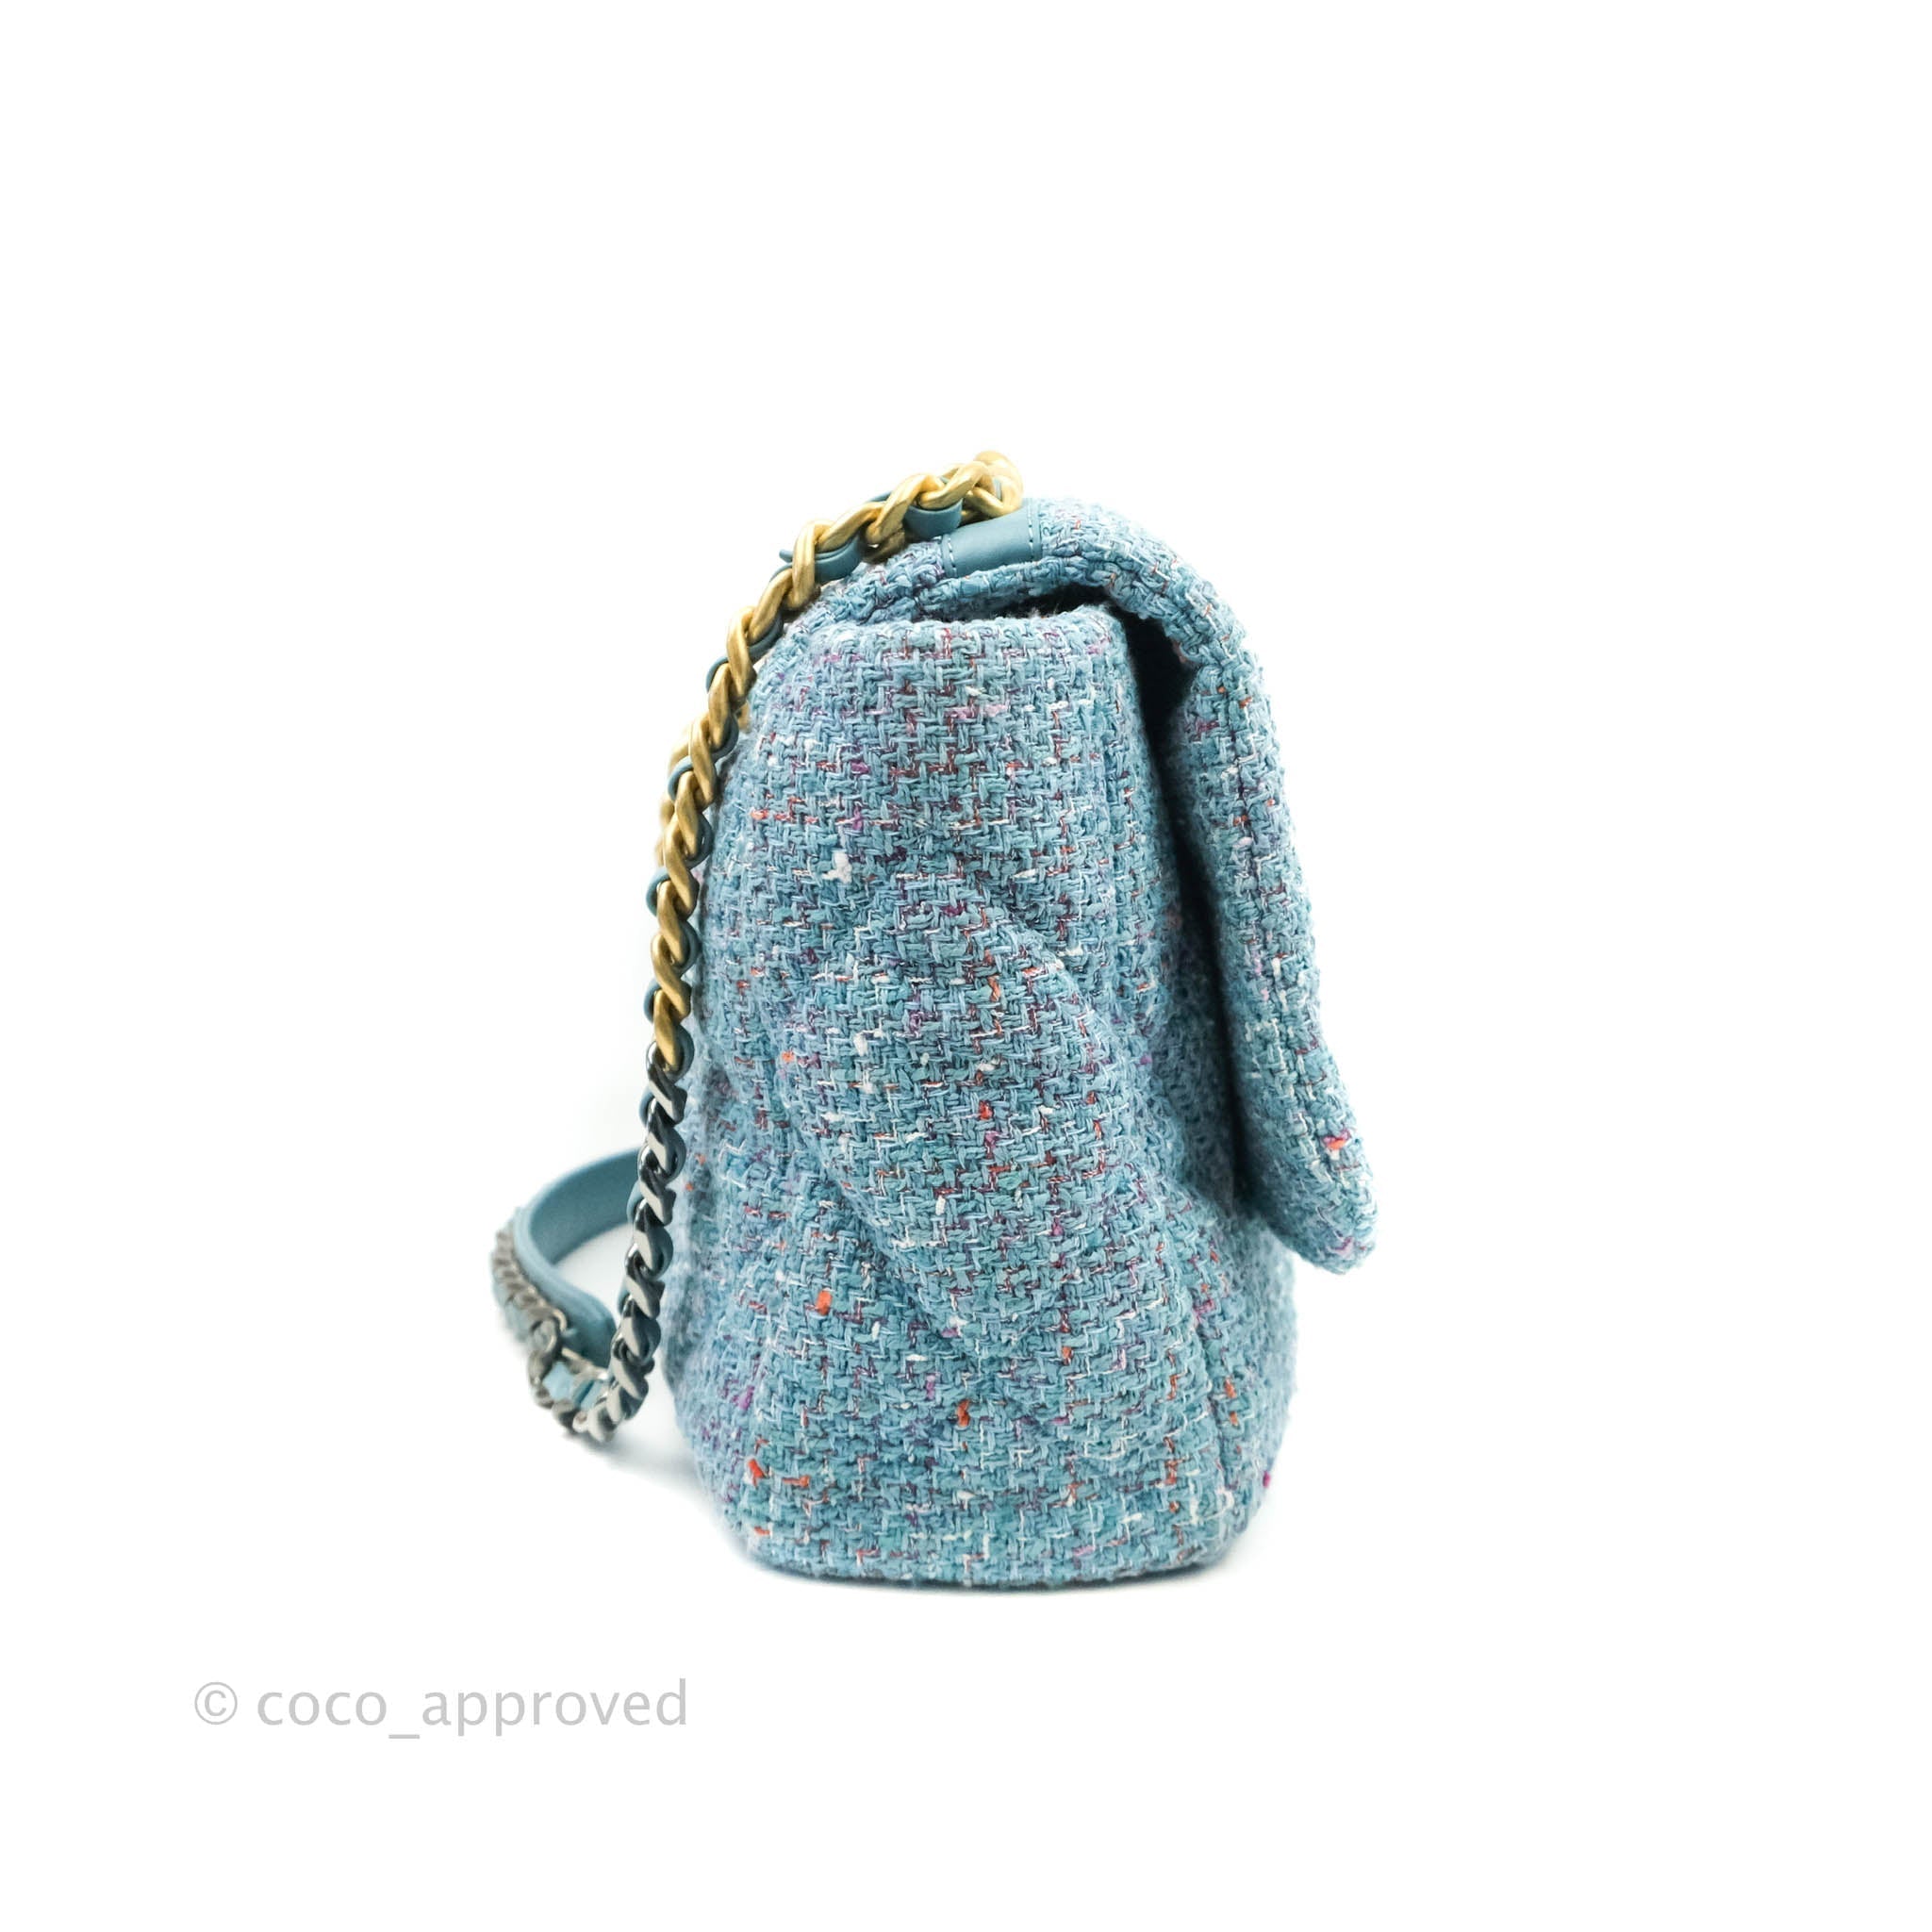 Chanel 19 Maxi Flap Bag Blue Tweed Mixed Hardware – Coco Approved